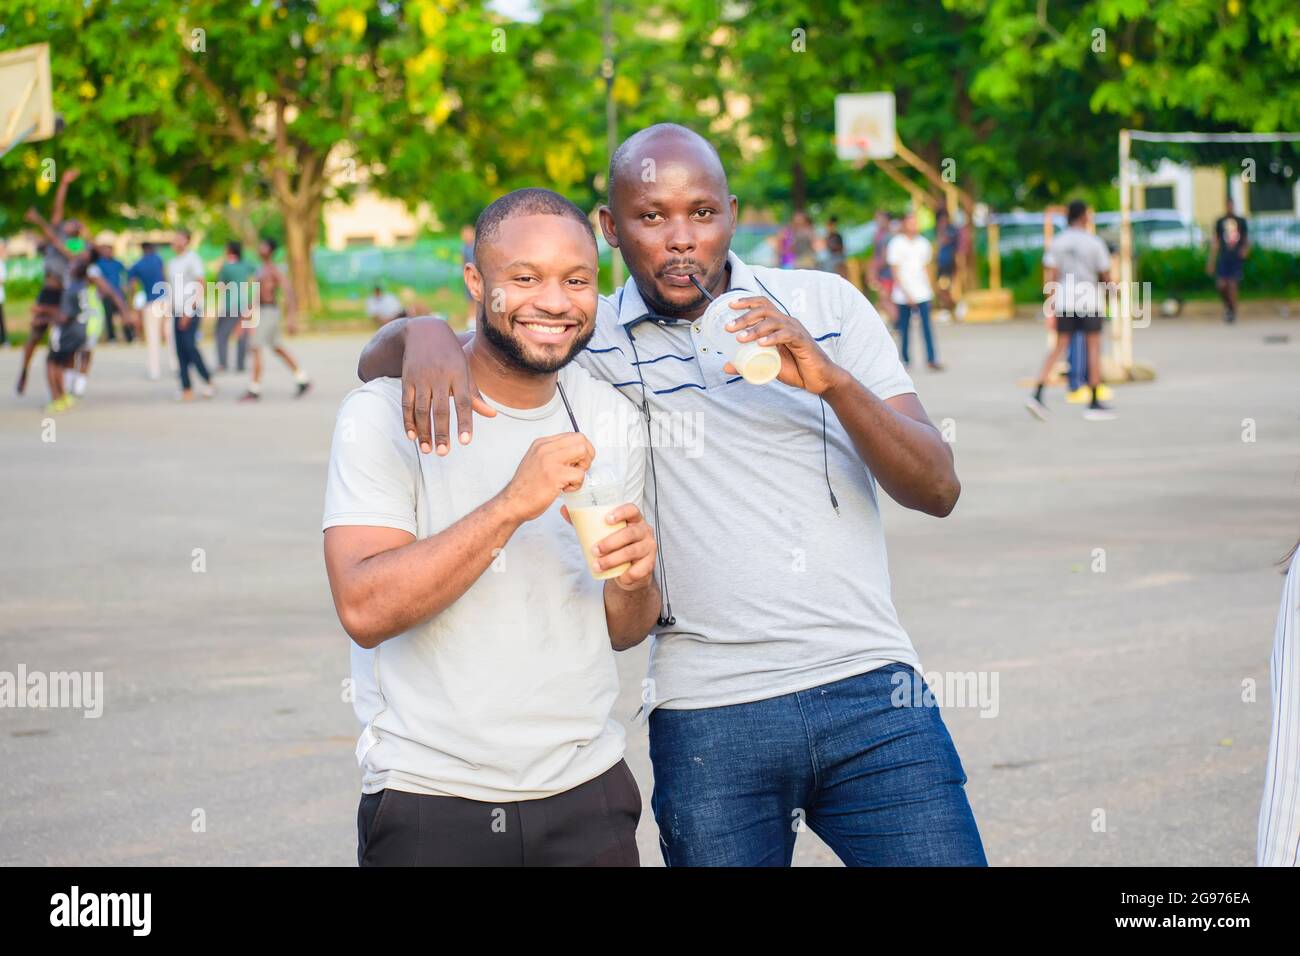 two male African friends standing and joyfully drinking fruit juice in an outdoor park in their leisure time Stock Photo